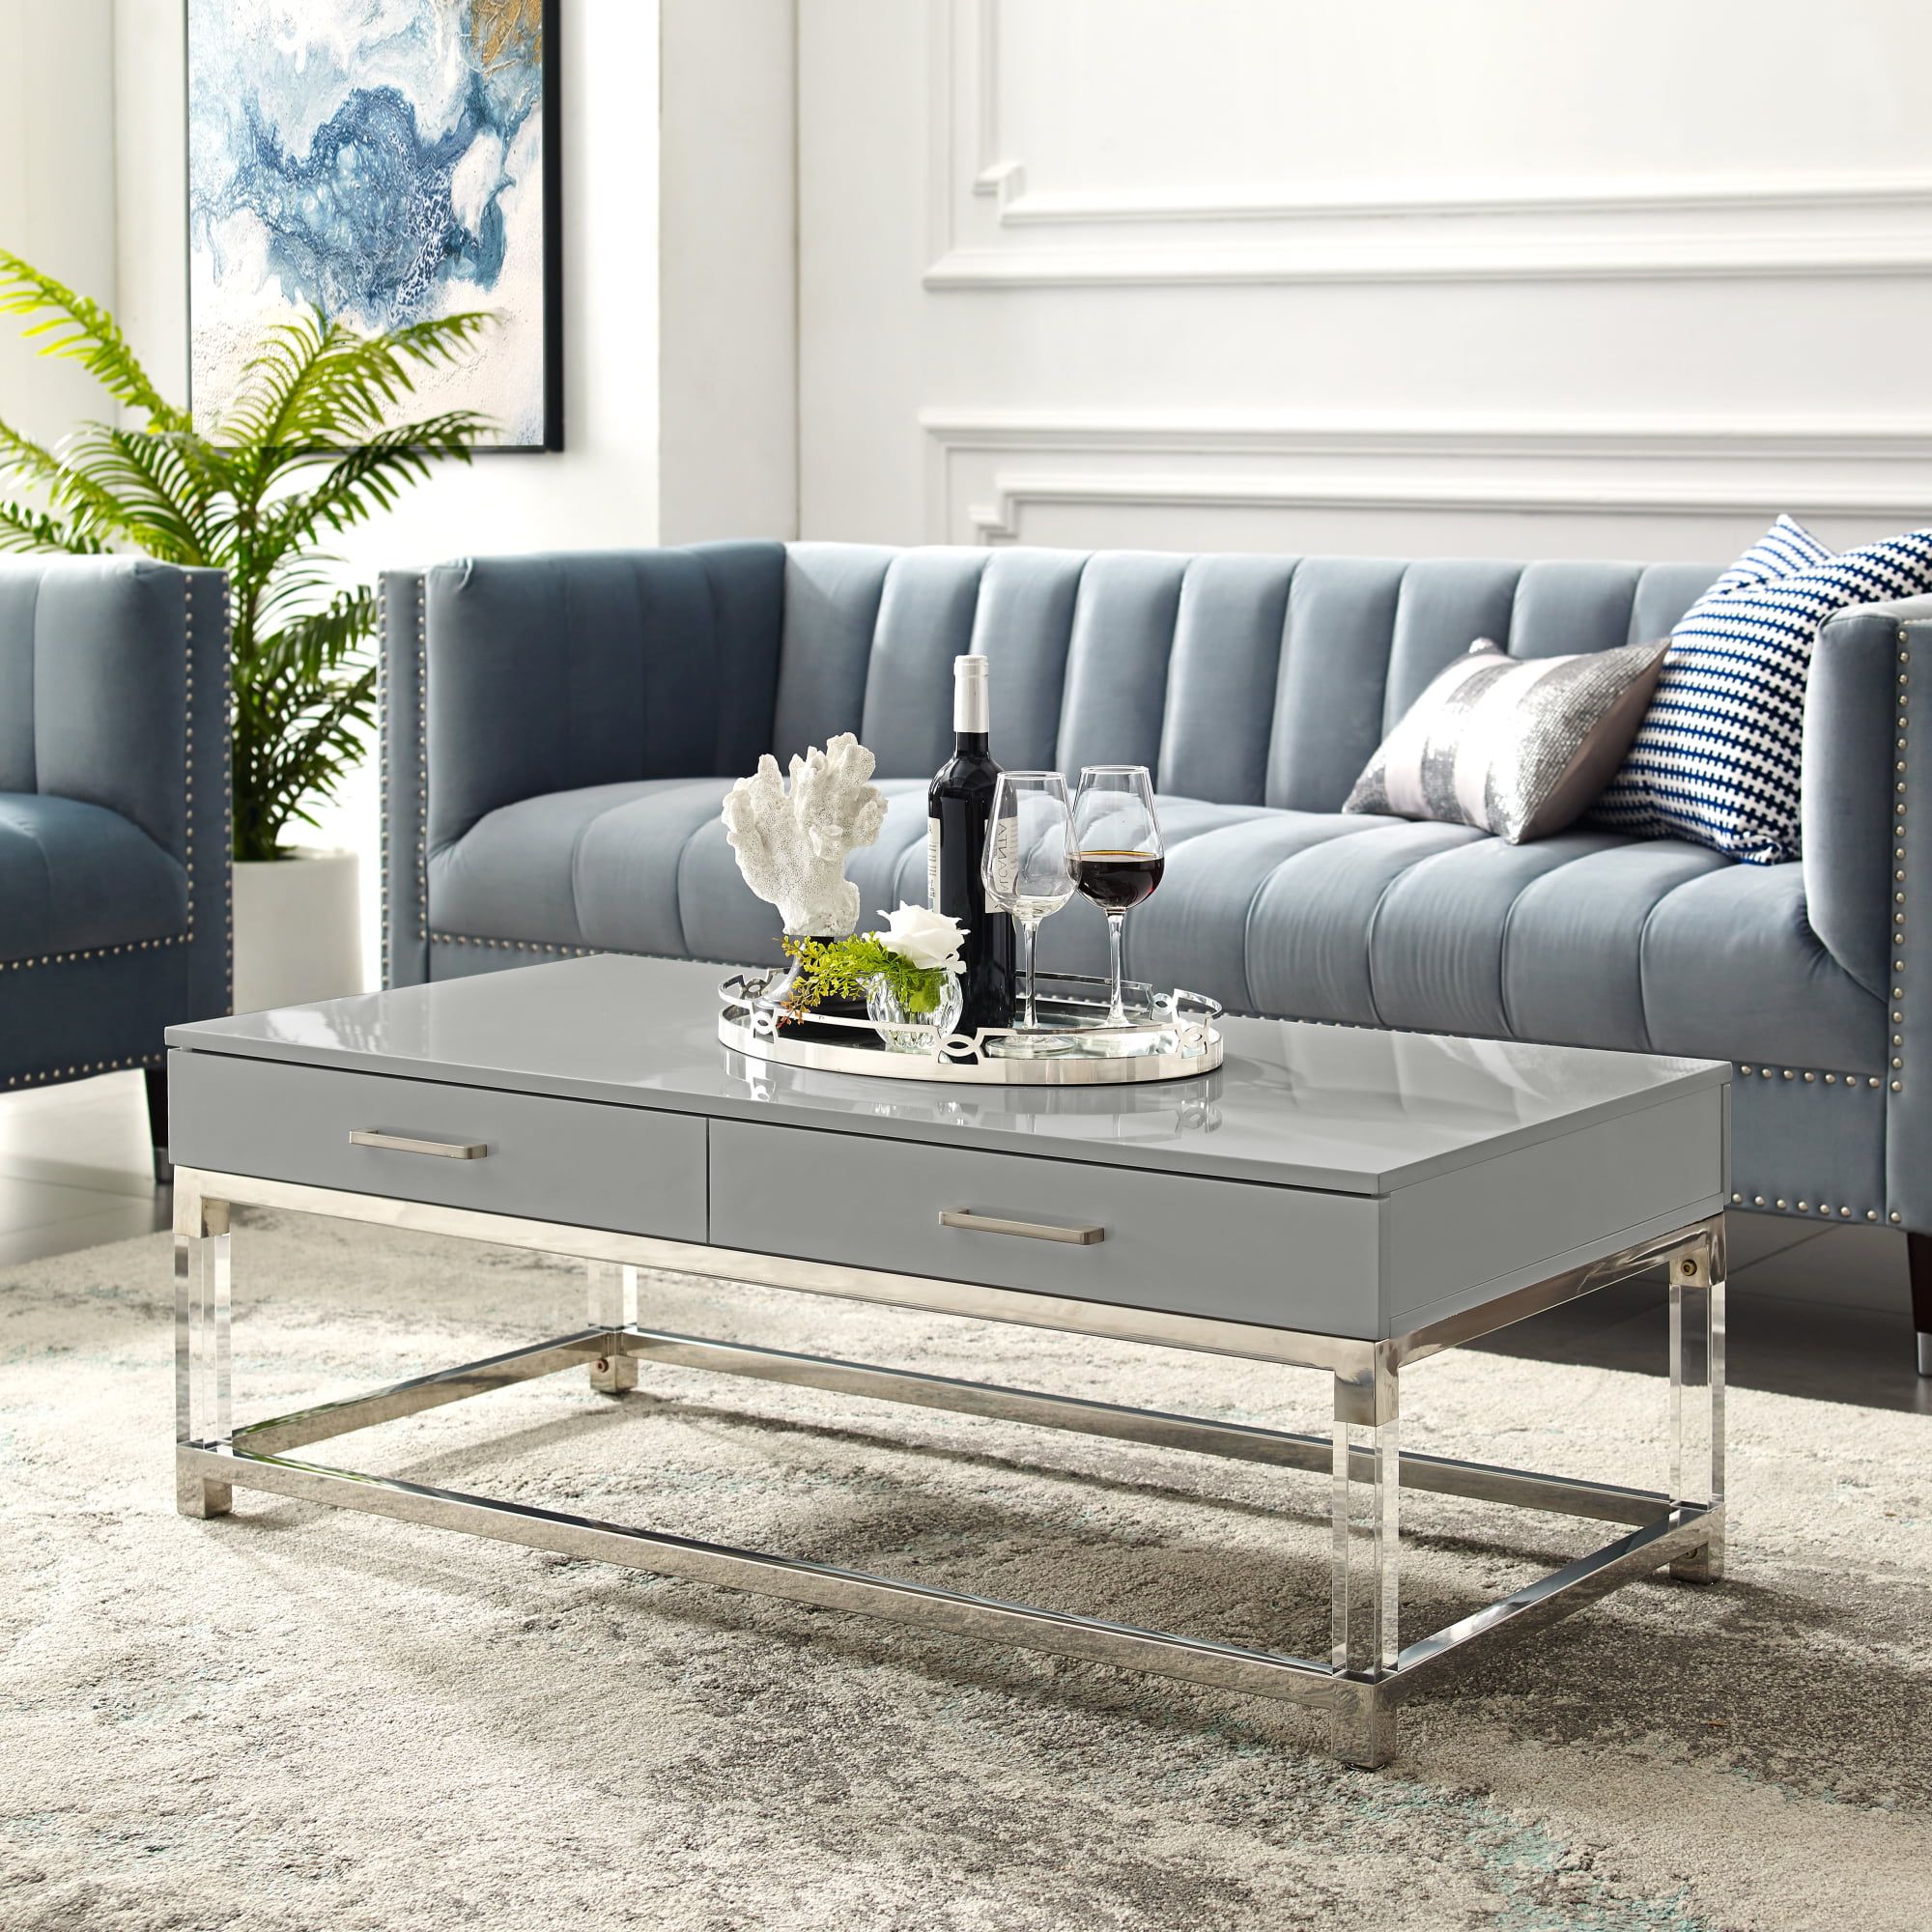 Recent Glossy Finished Metal Coffee Tables Inside Ebbe Light Grey Chrome Coffee Table – High Gloss Finish, Acrylic Leg,  Stainless Steel Base, 2 Drawers – Walmart (View 8 of 10)